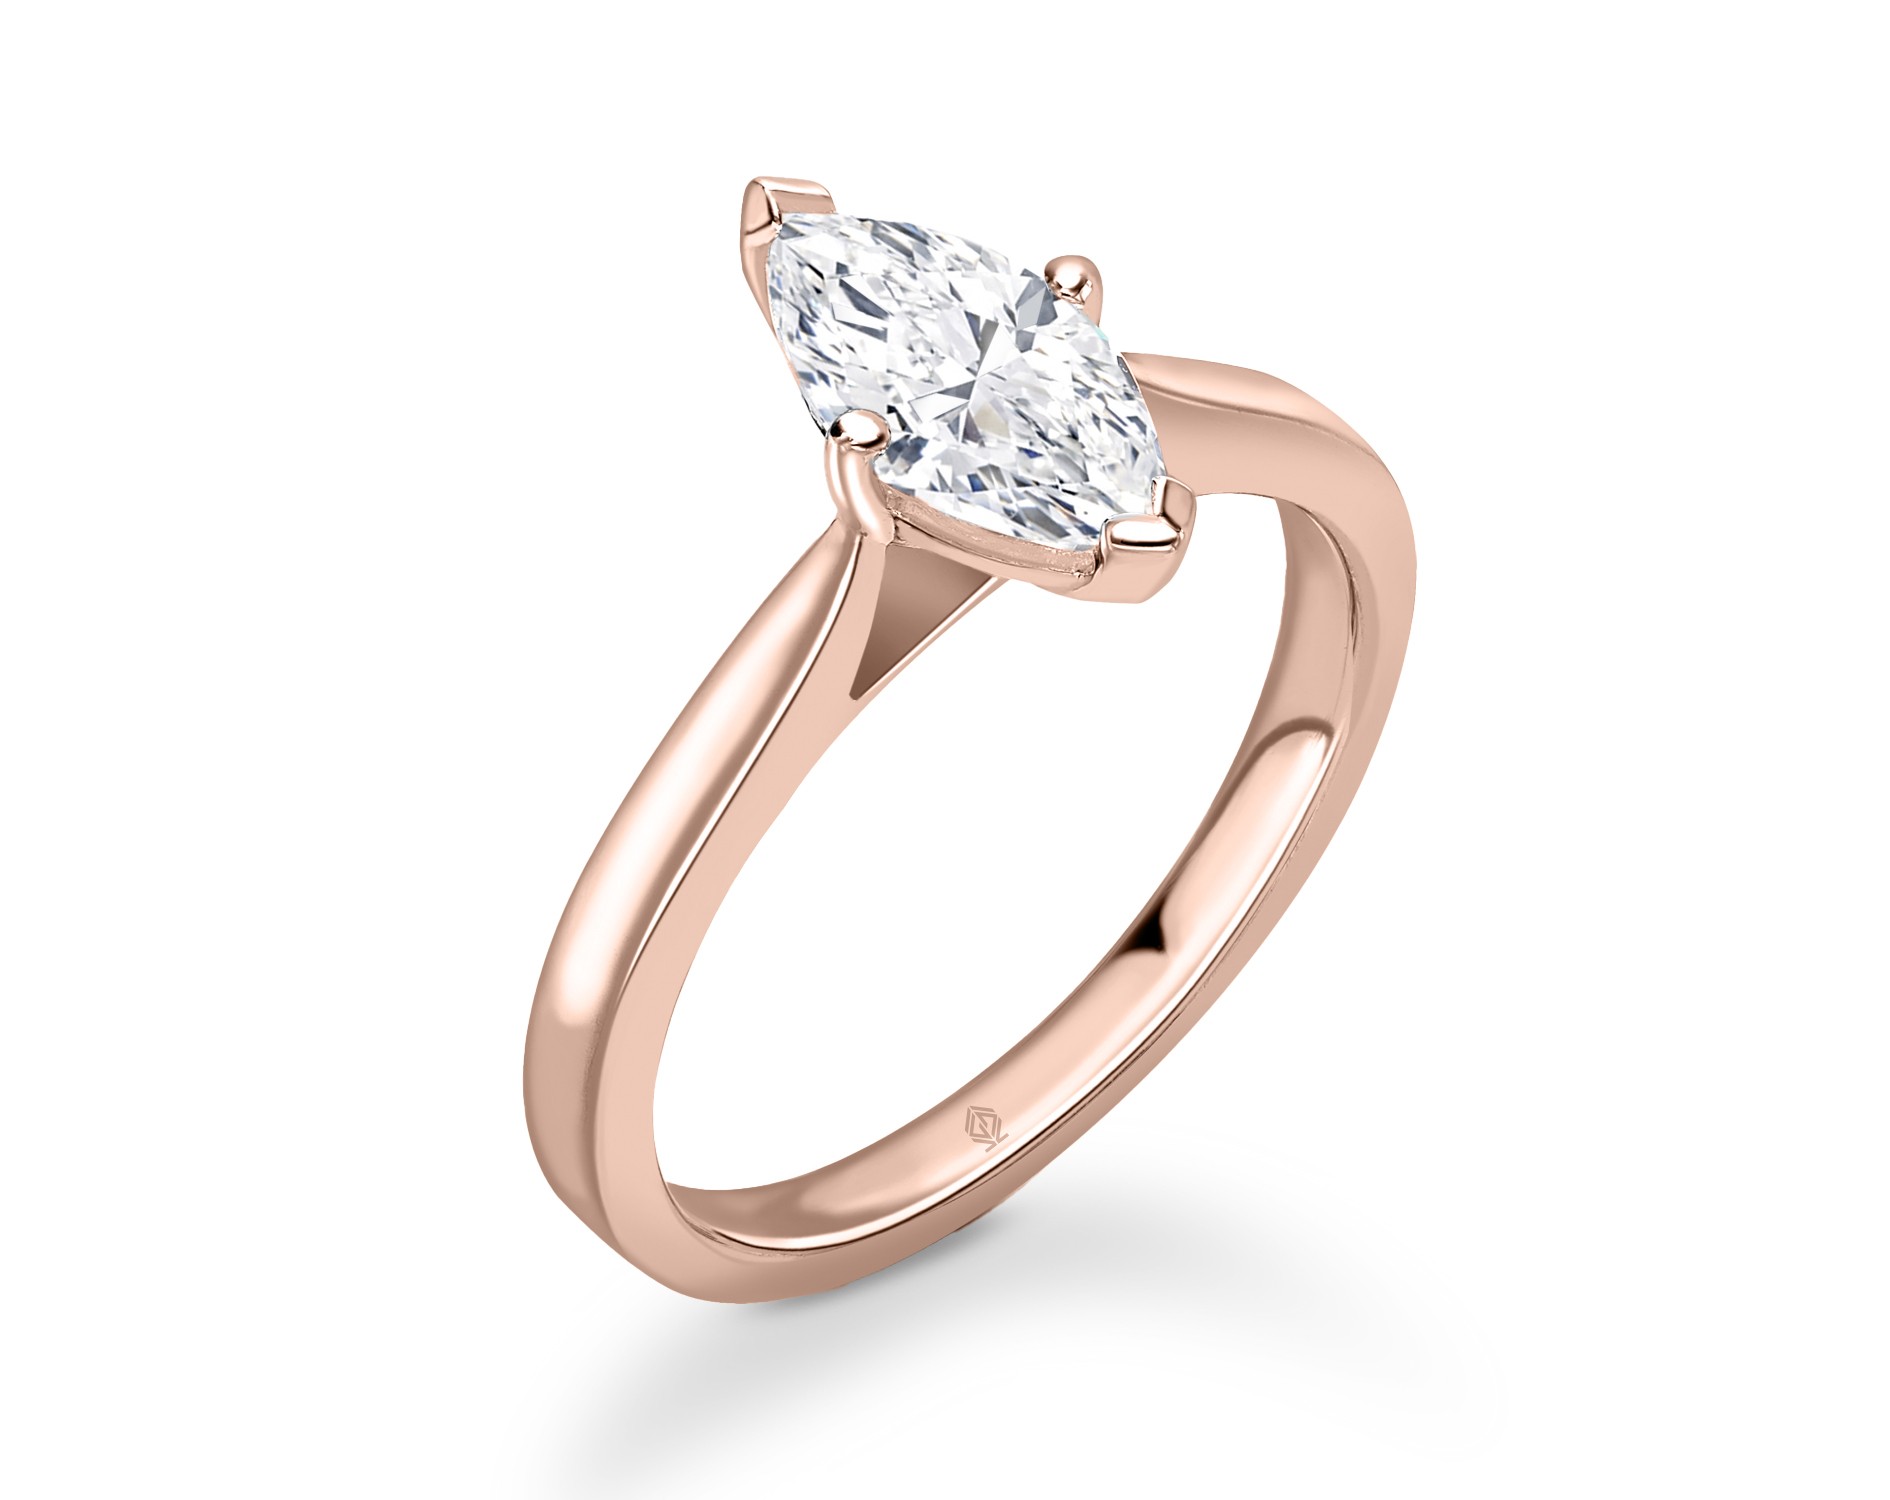 18K ROSE GOLD 4 PRONGS MARQUISE CUT DIAMOND ENGAGEMENT RING